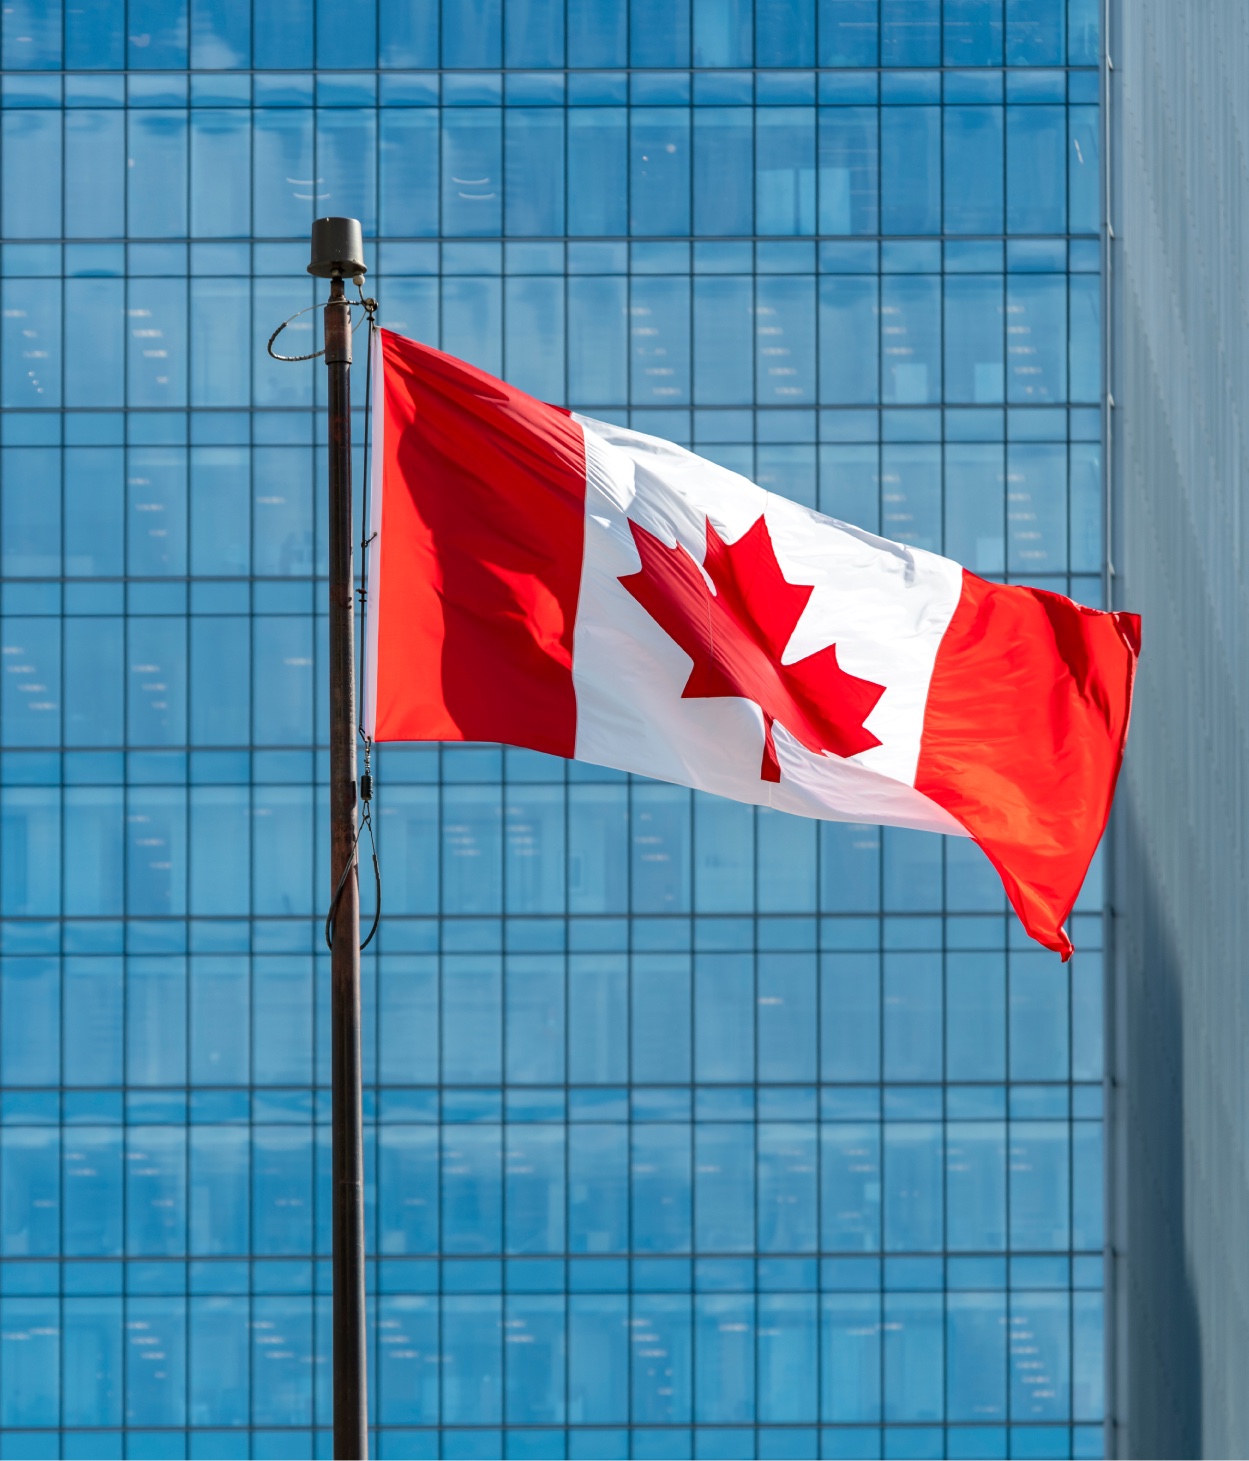 The Canadian flag flies in front of an office building.